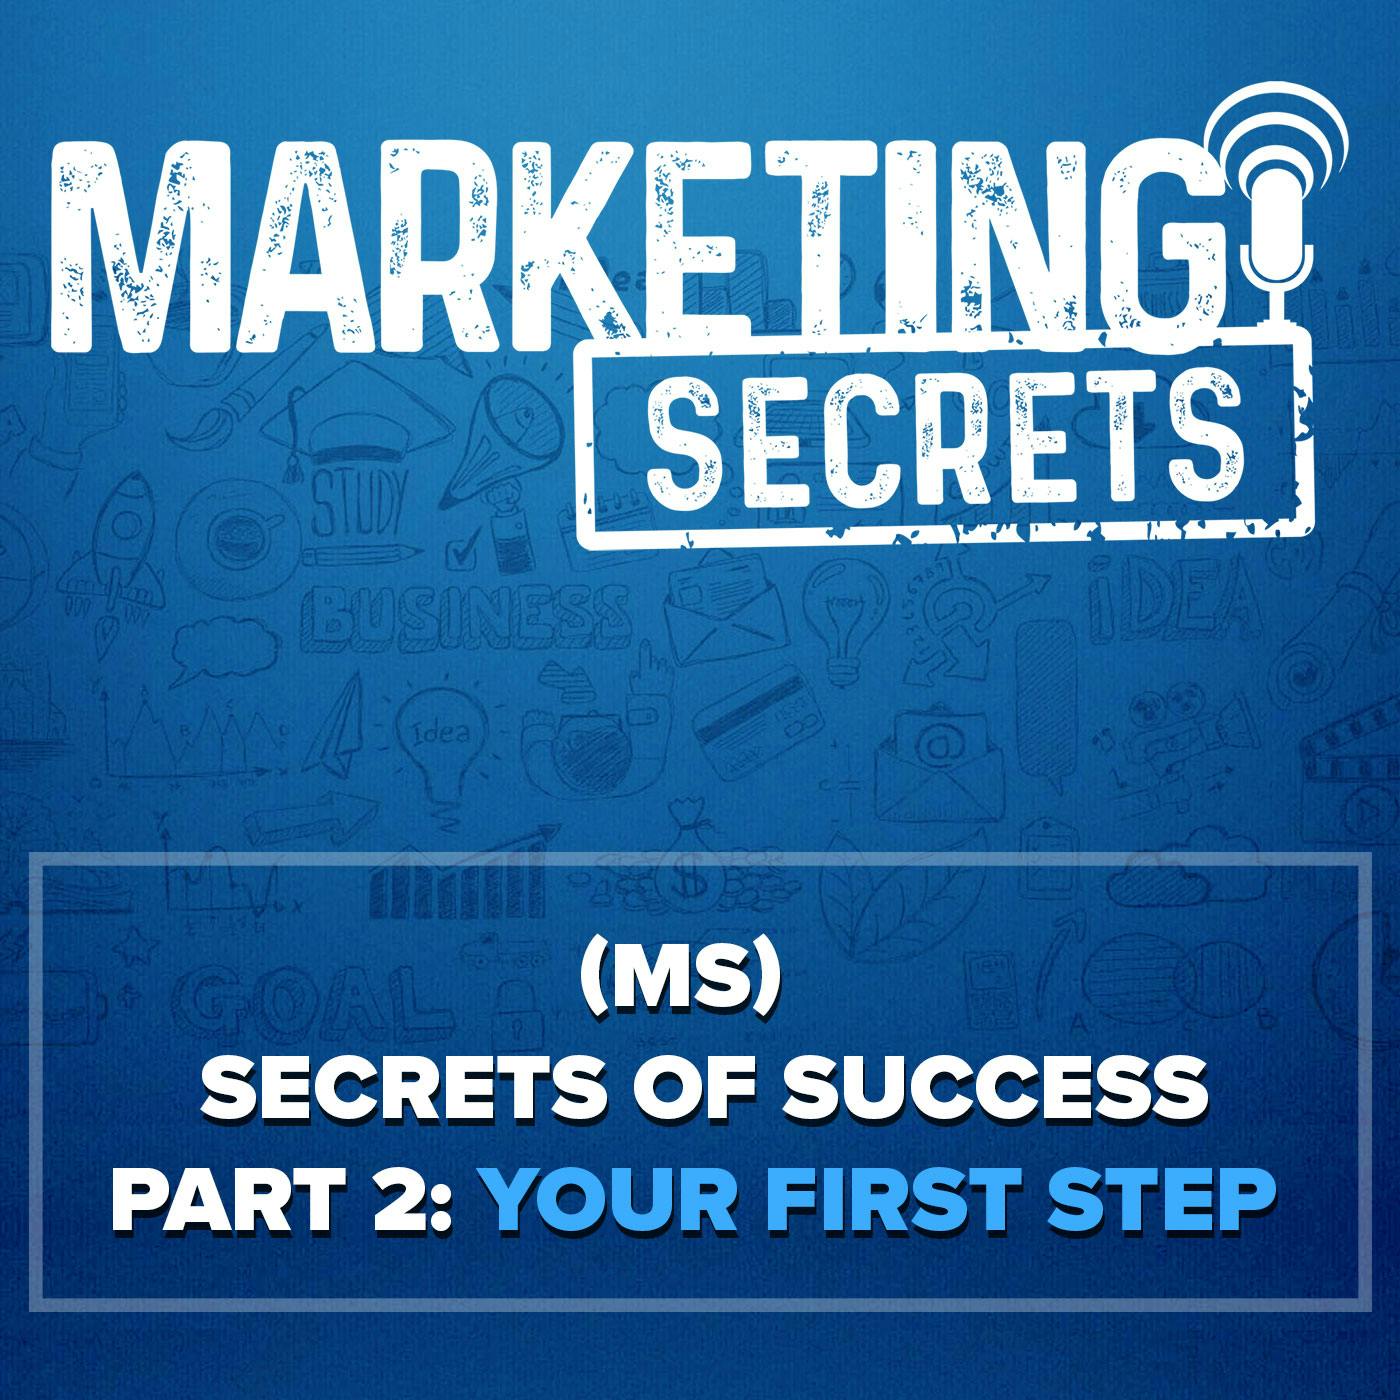 (MS) Secrets of Success - Part 2: Your First Step